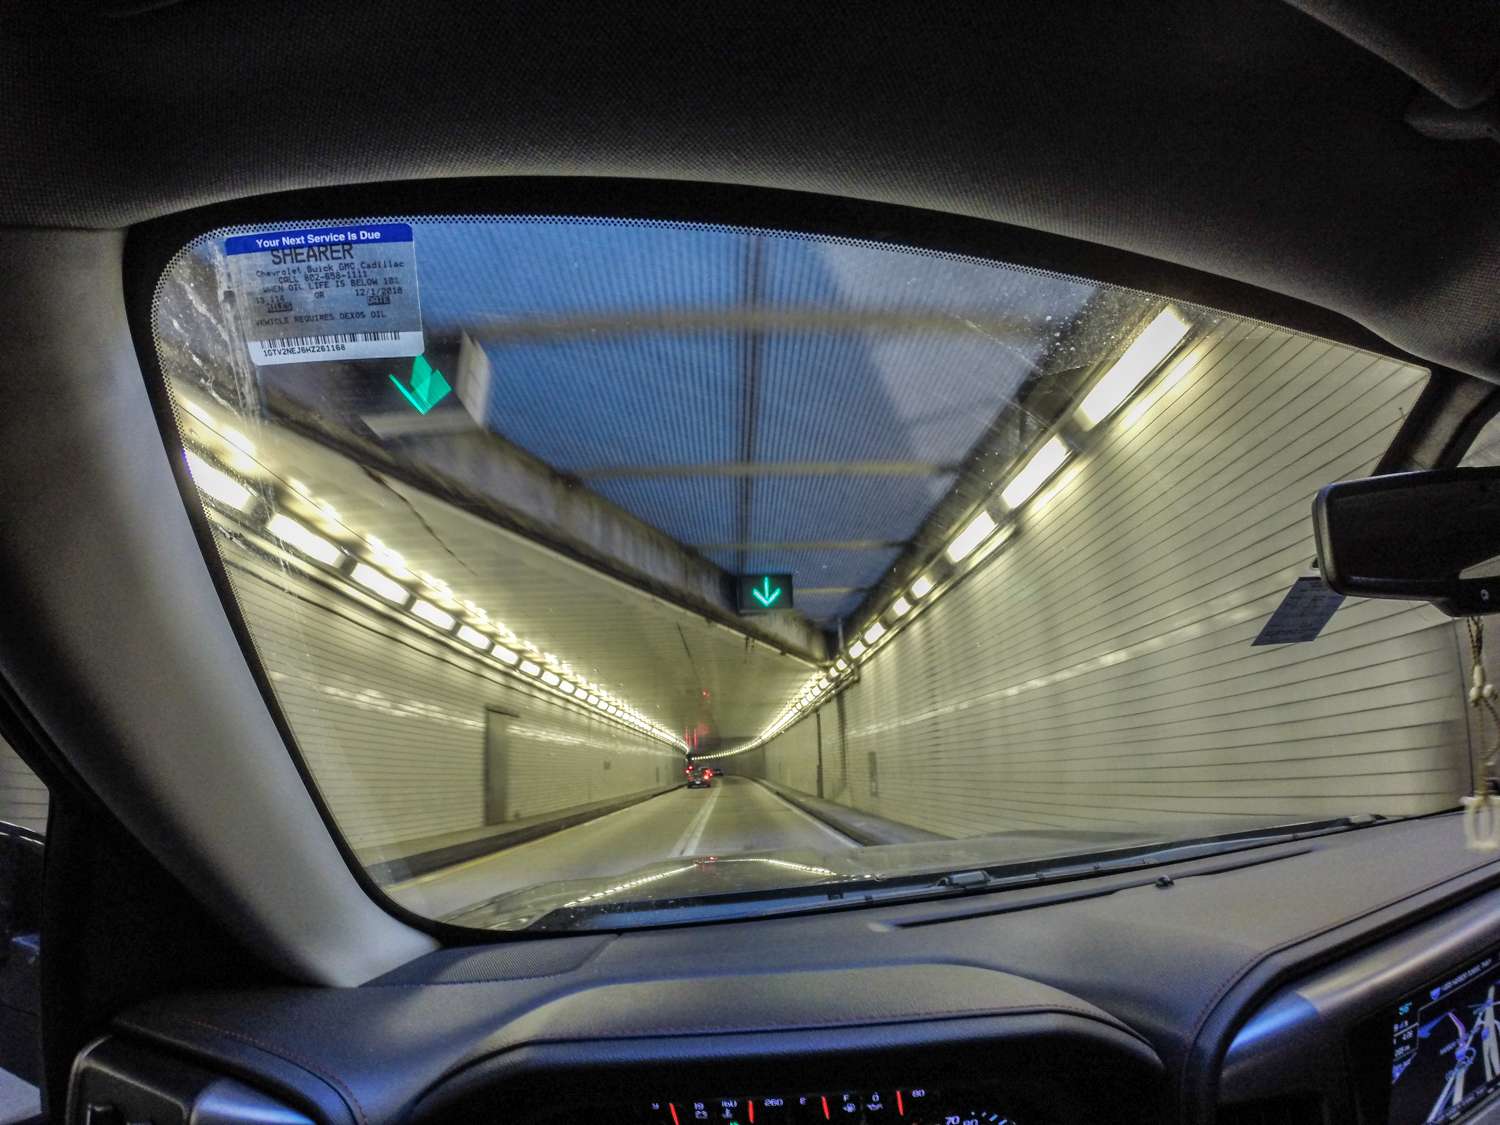 Even inside a tunnel on I-95.
